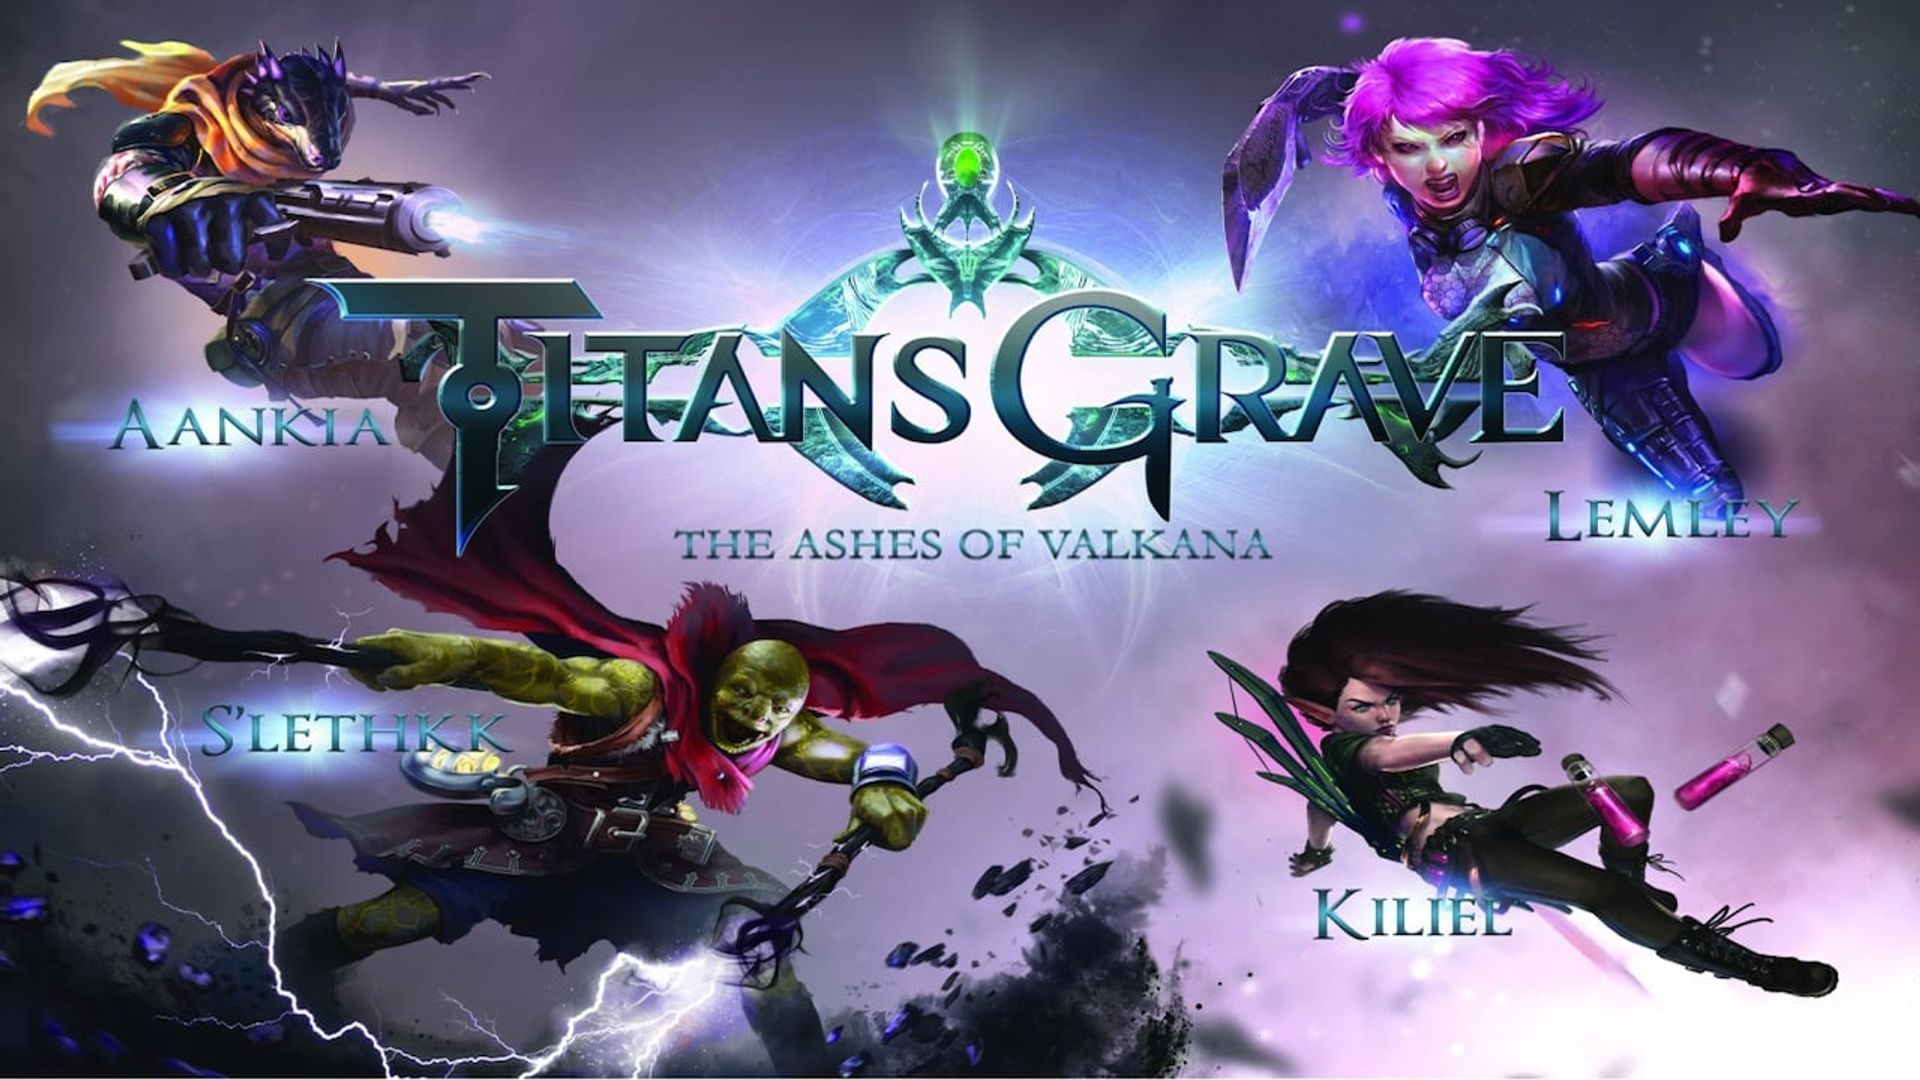 Titansgrave: The Ashes of Valkana background